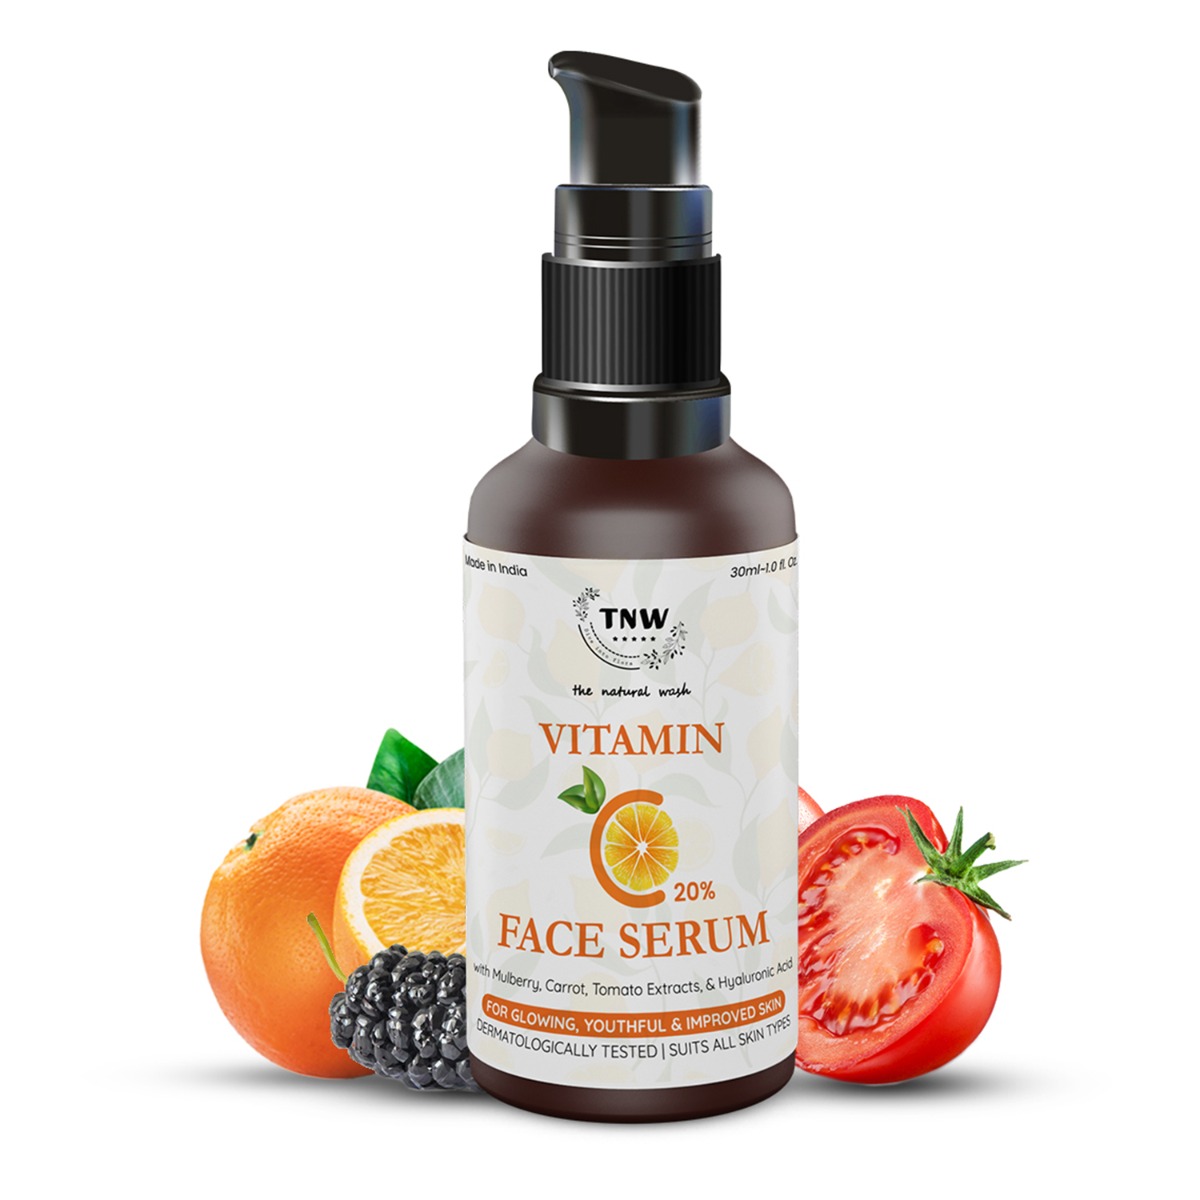 TNW - The Natural Wash Vitamin C Face Serum For Glowing Skin, 30ml